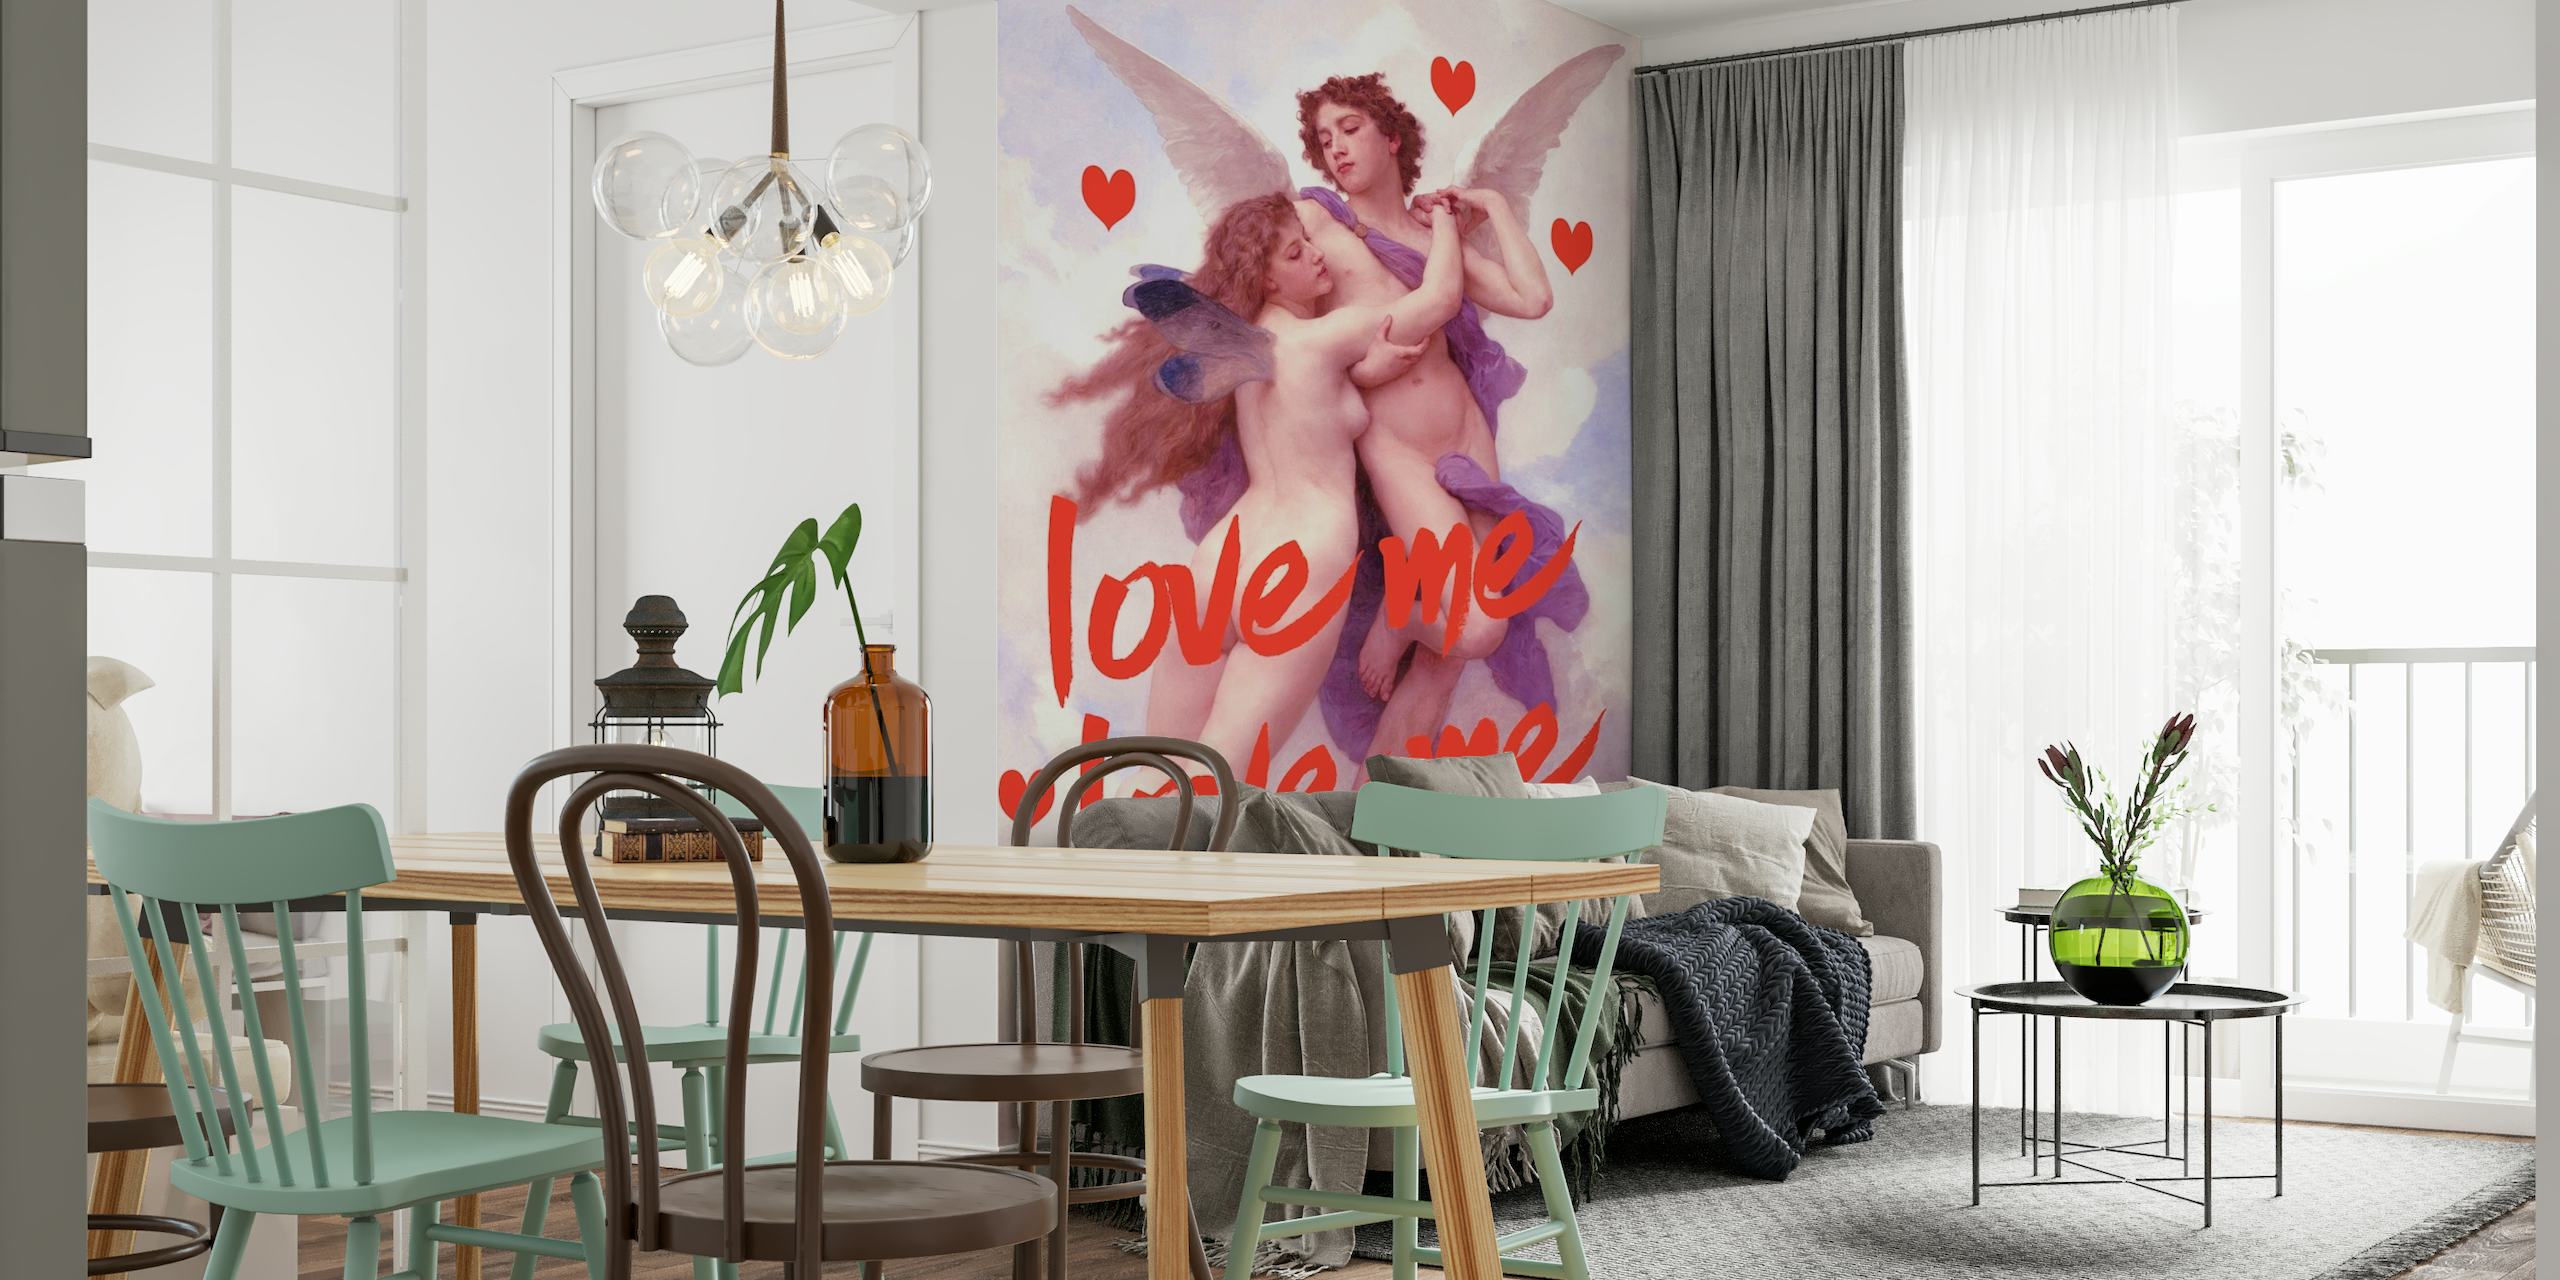 Romantic Love Angel wall mural with angels and hearts